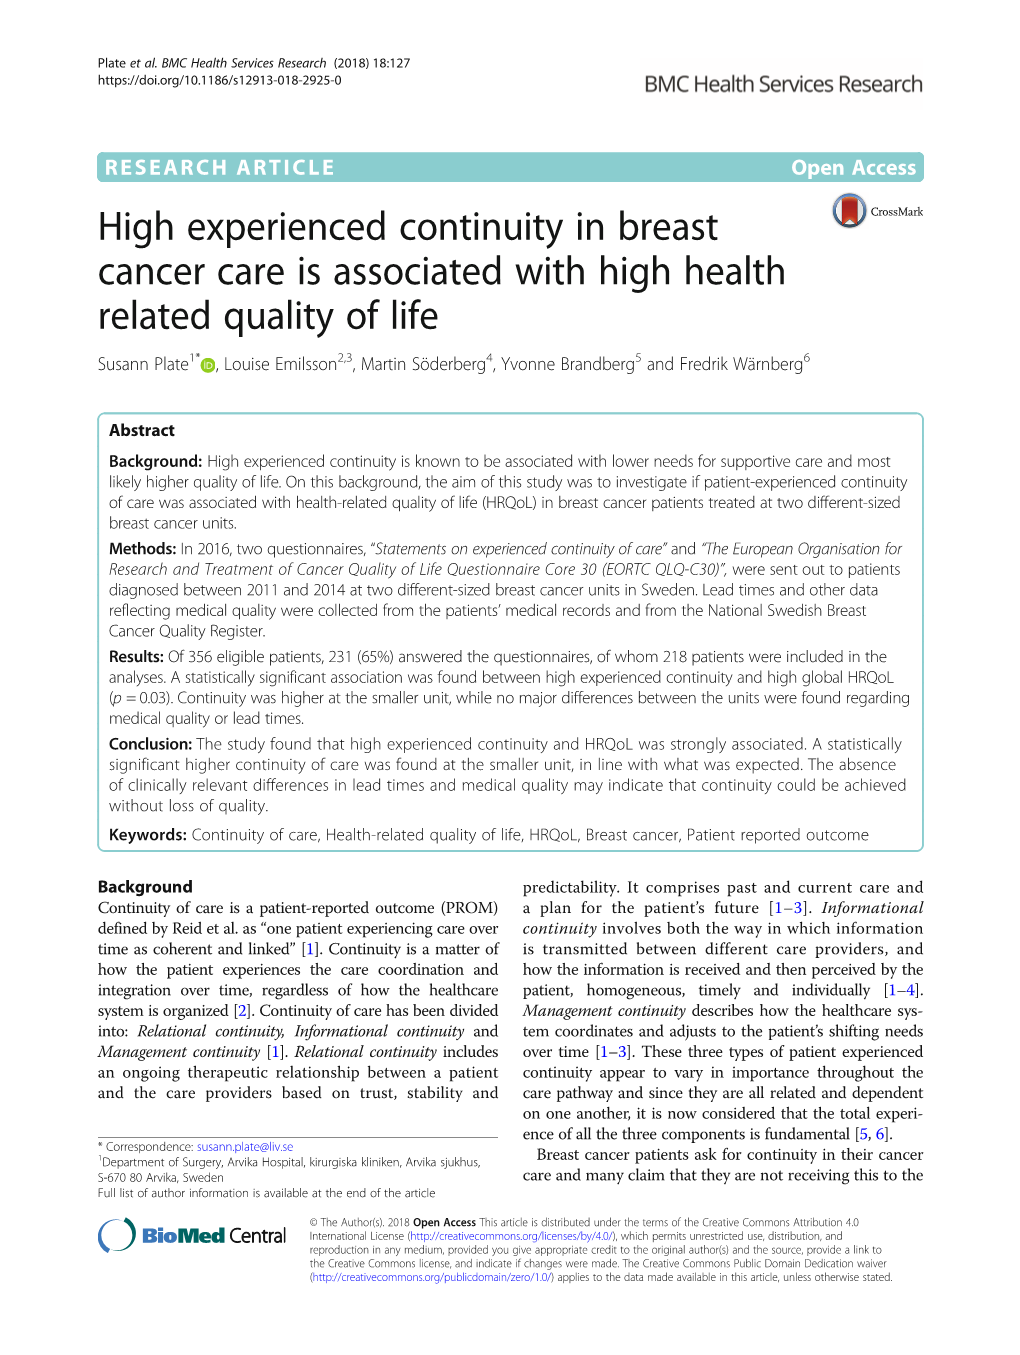 High Experienced Continuity in Breast Cancer Care Is Associated with High